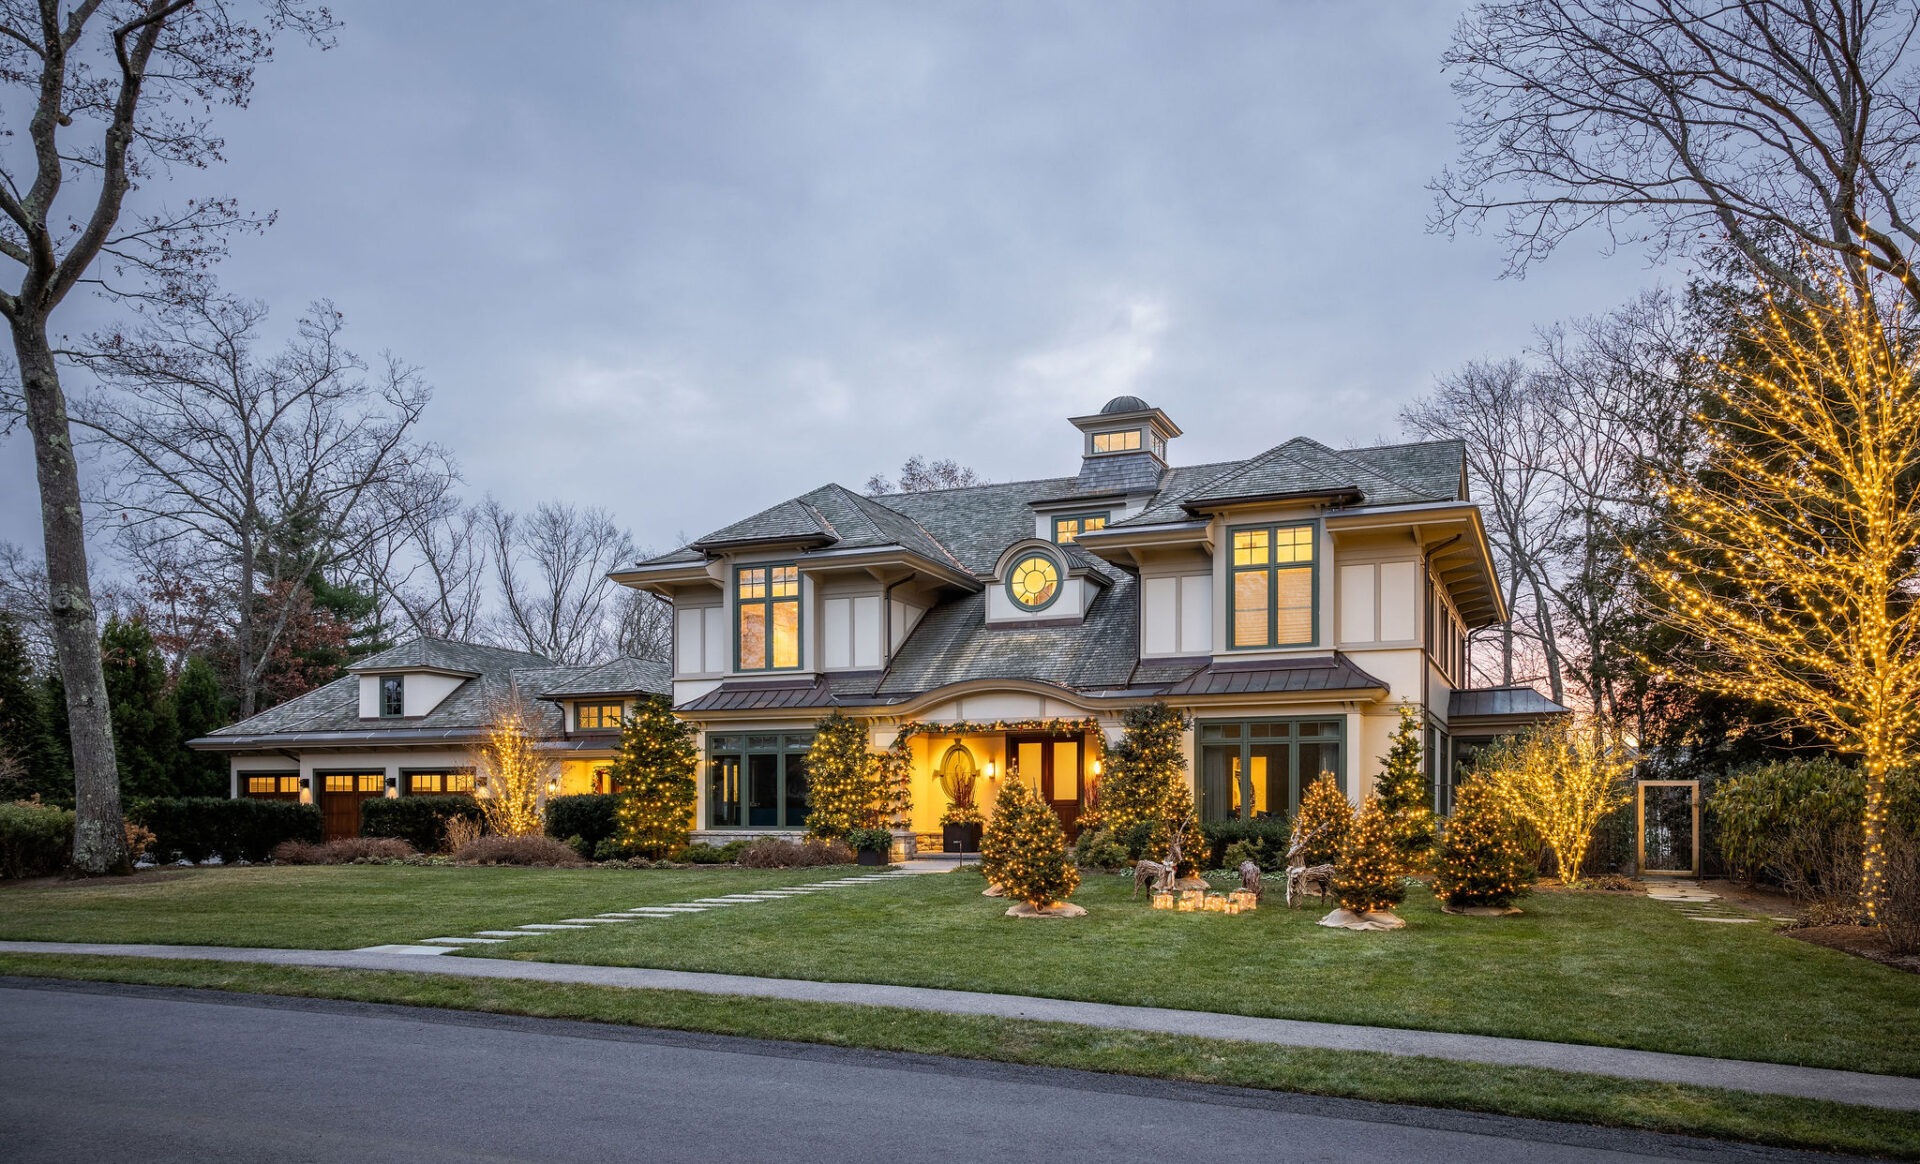 A large, elegant two-story house with a well-manicured lawn, warm exterior lighting, and holiday decorations under a twilight sky.